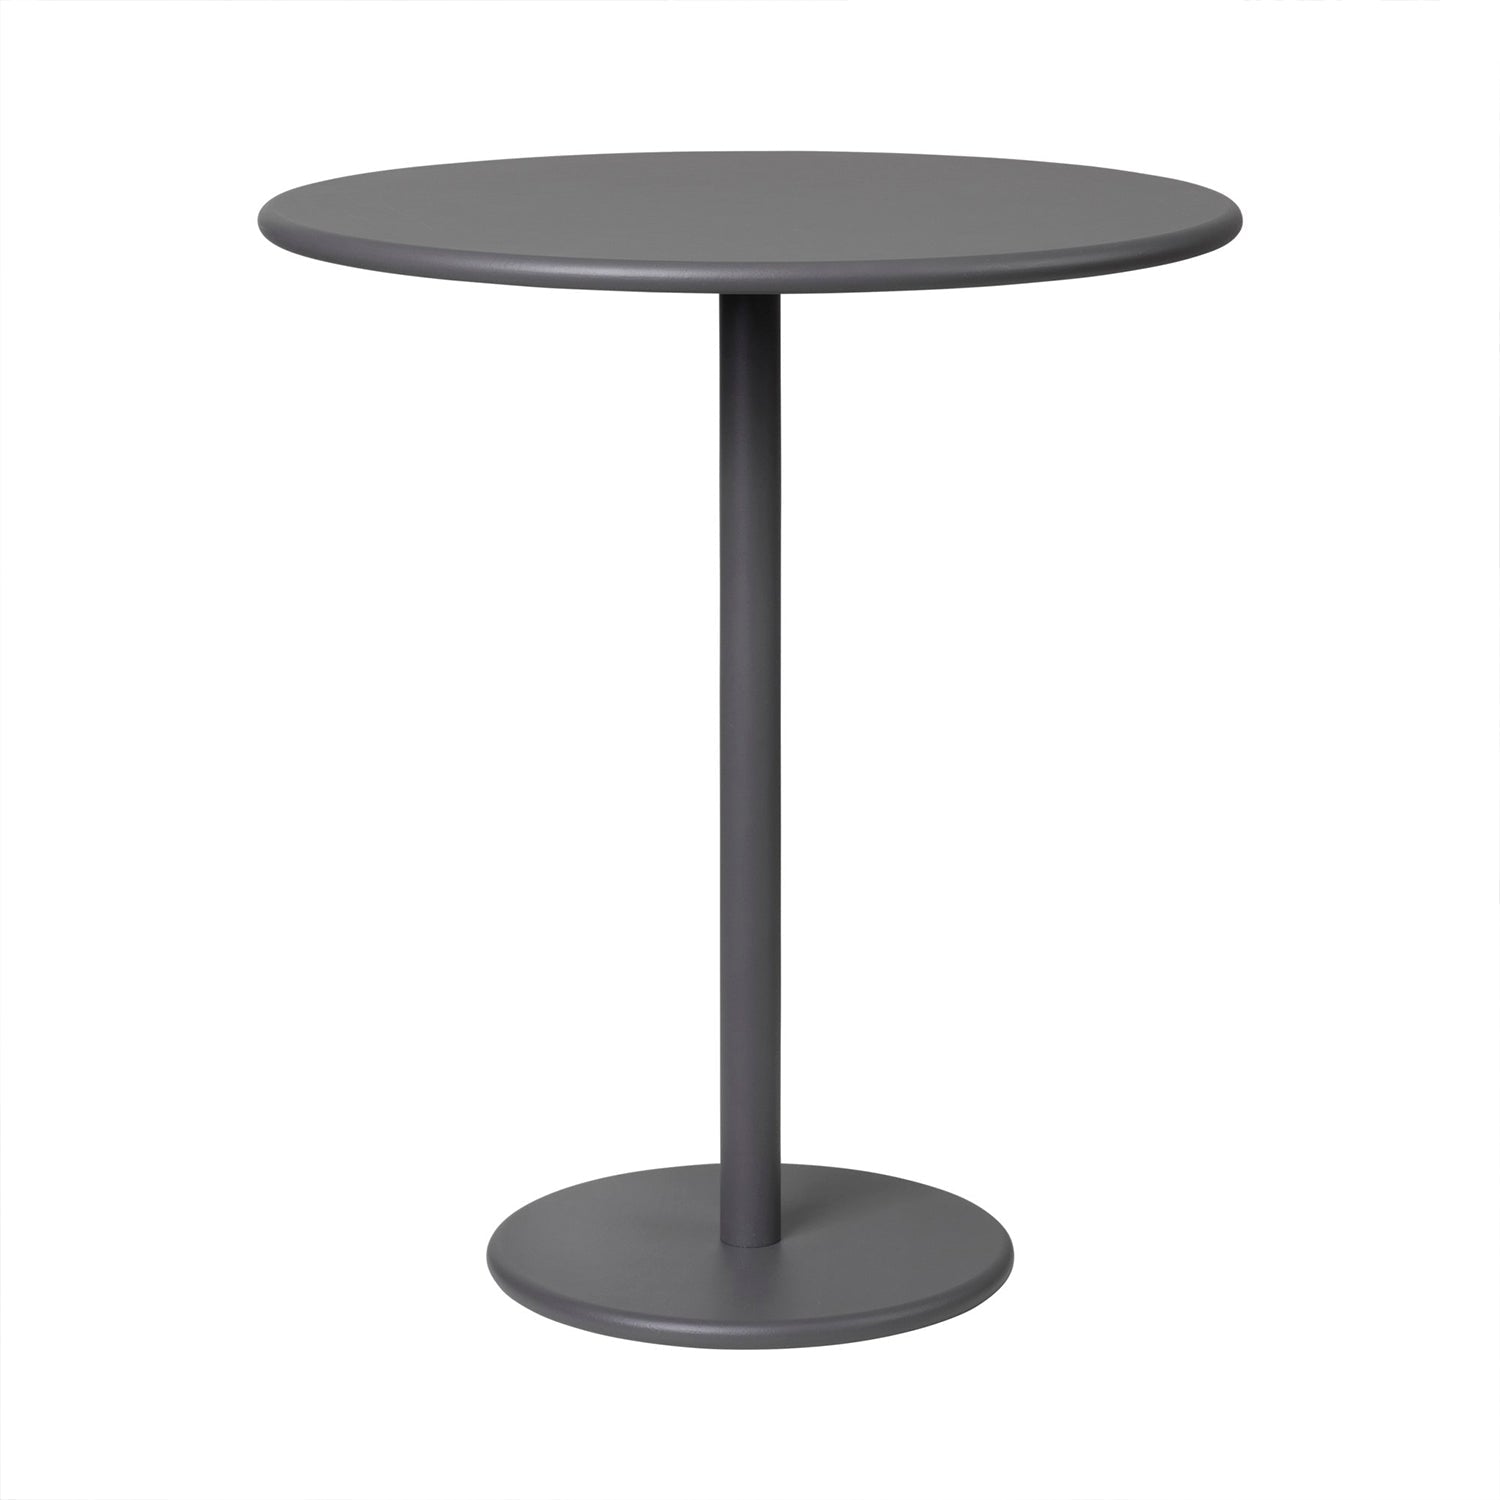 GRAY STAY SUPPORT TABLE